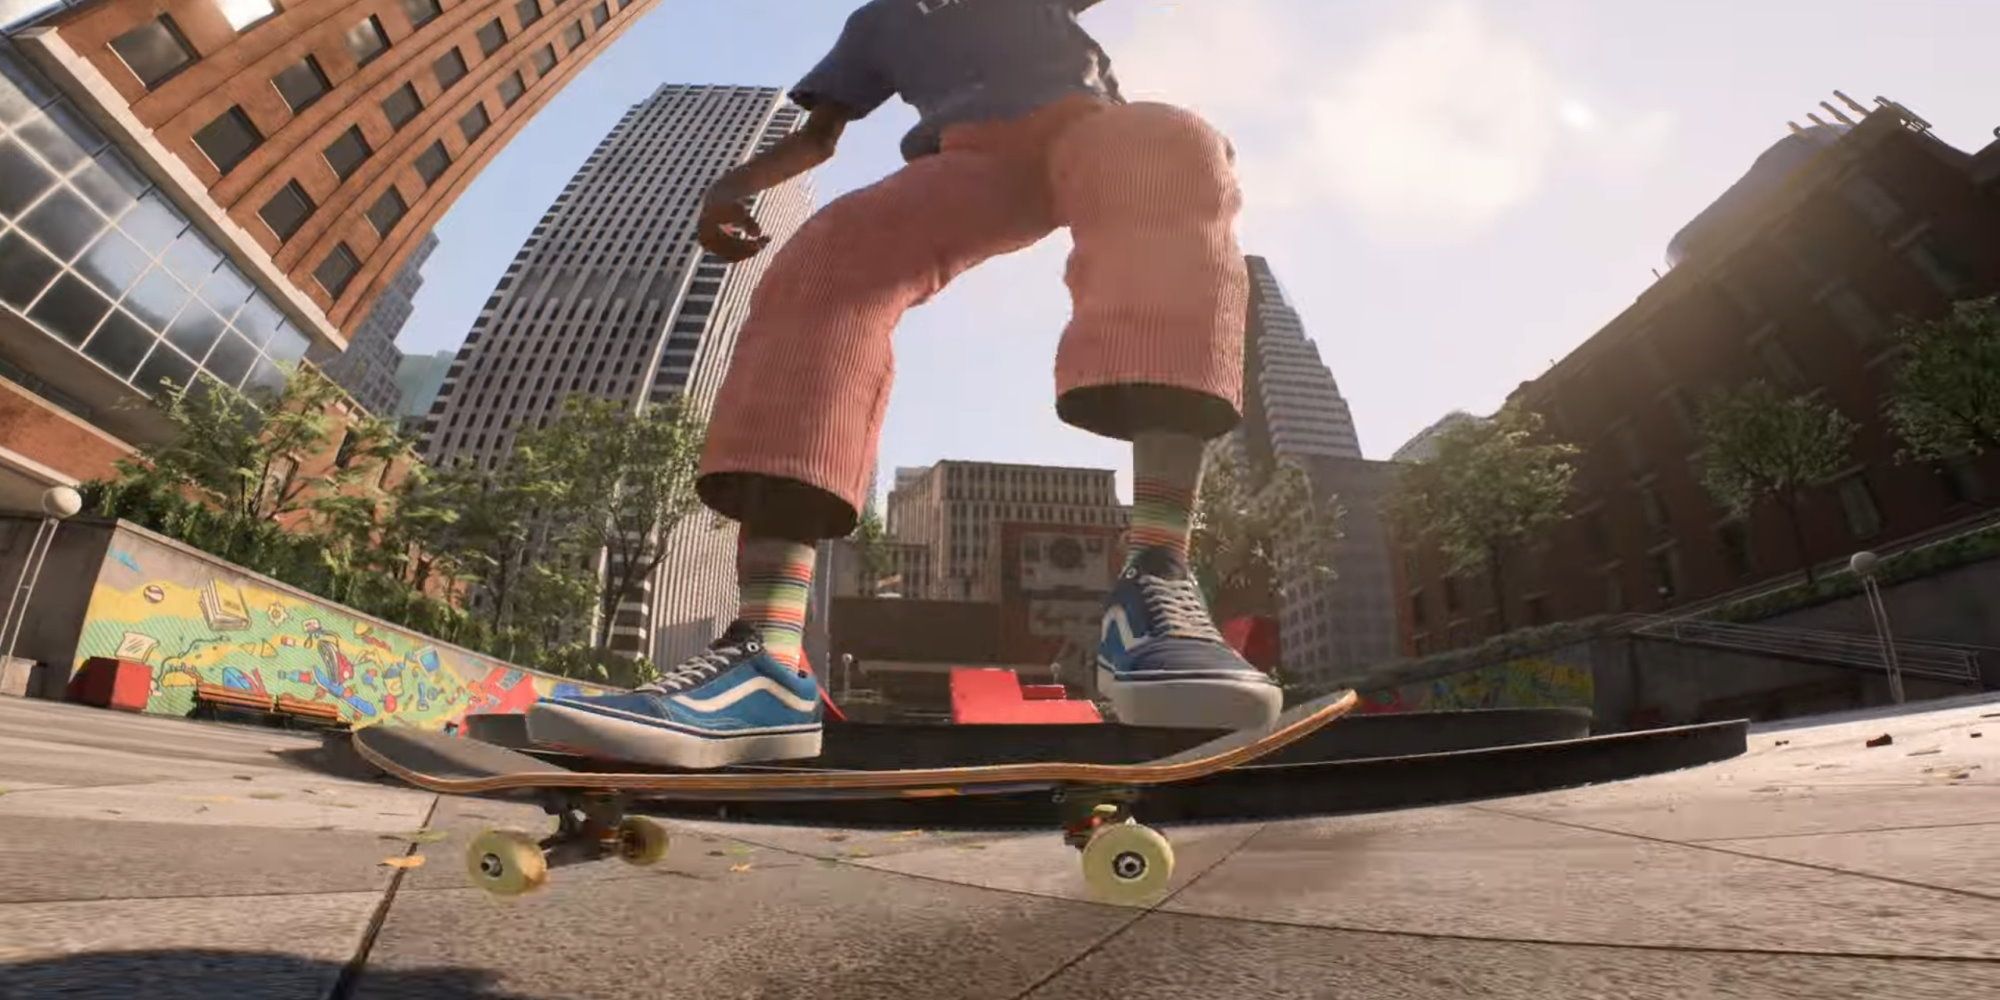 Skate 4': EA unveils 'pre-pre-pre-alpha' gameplay trailer showing fans that  it's not launching anytime soon - EconoTimes